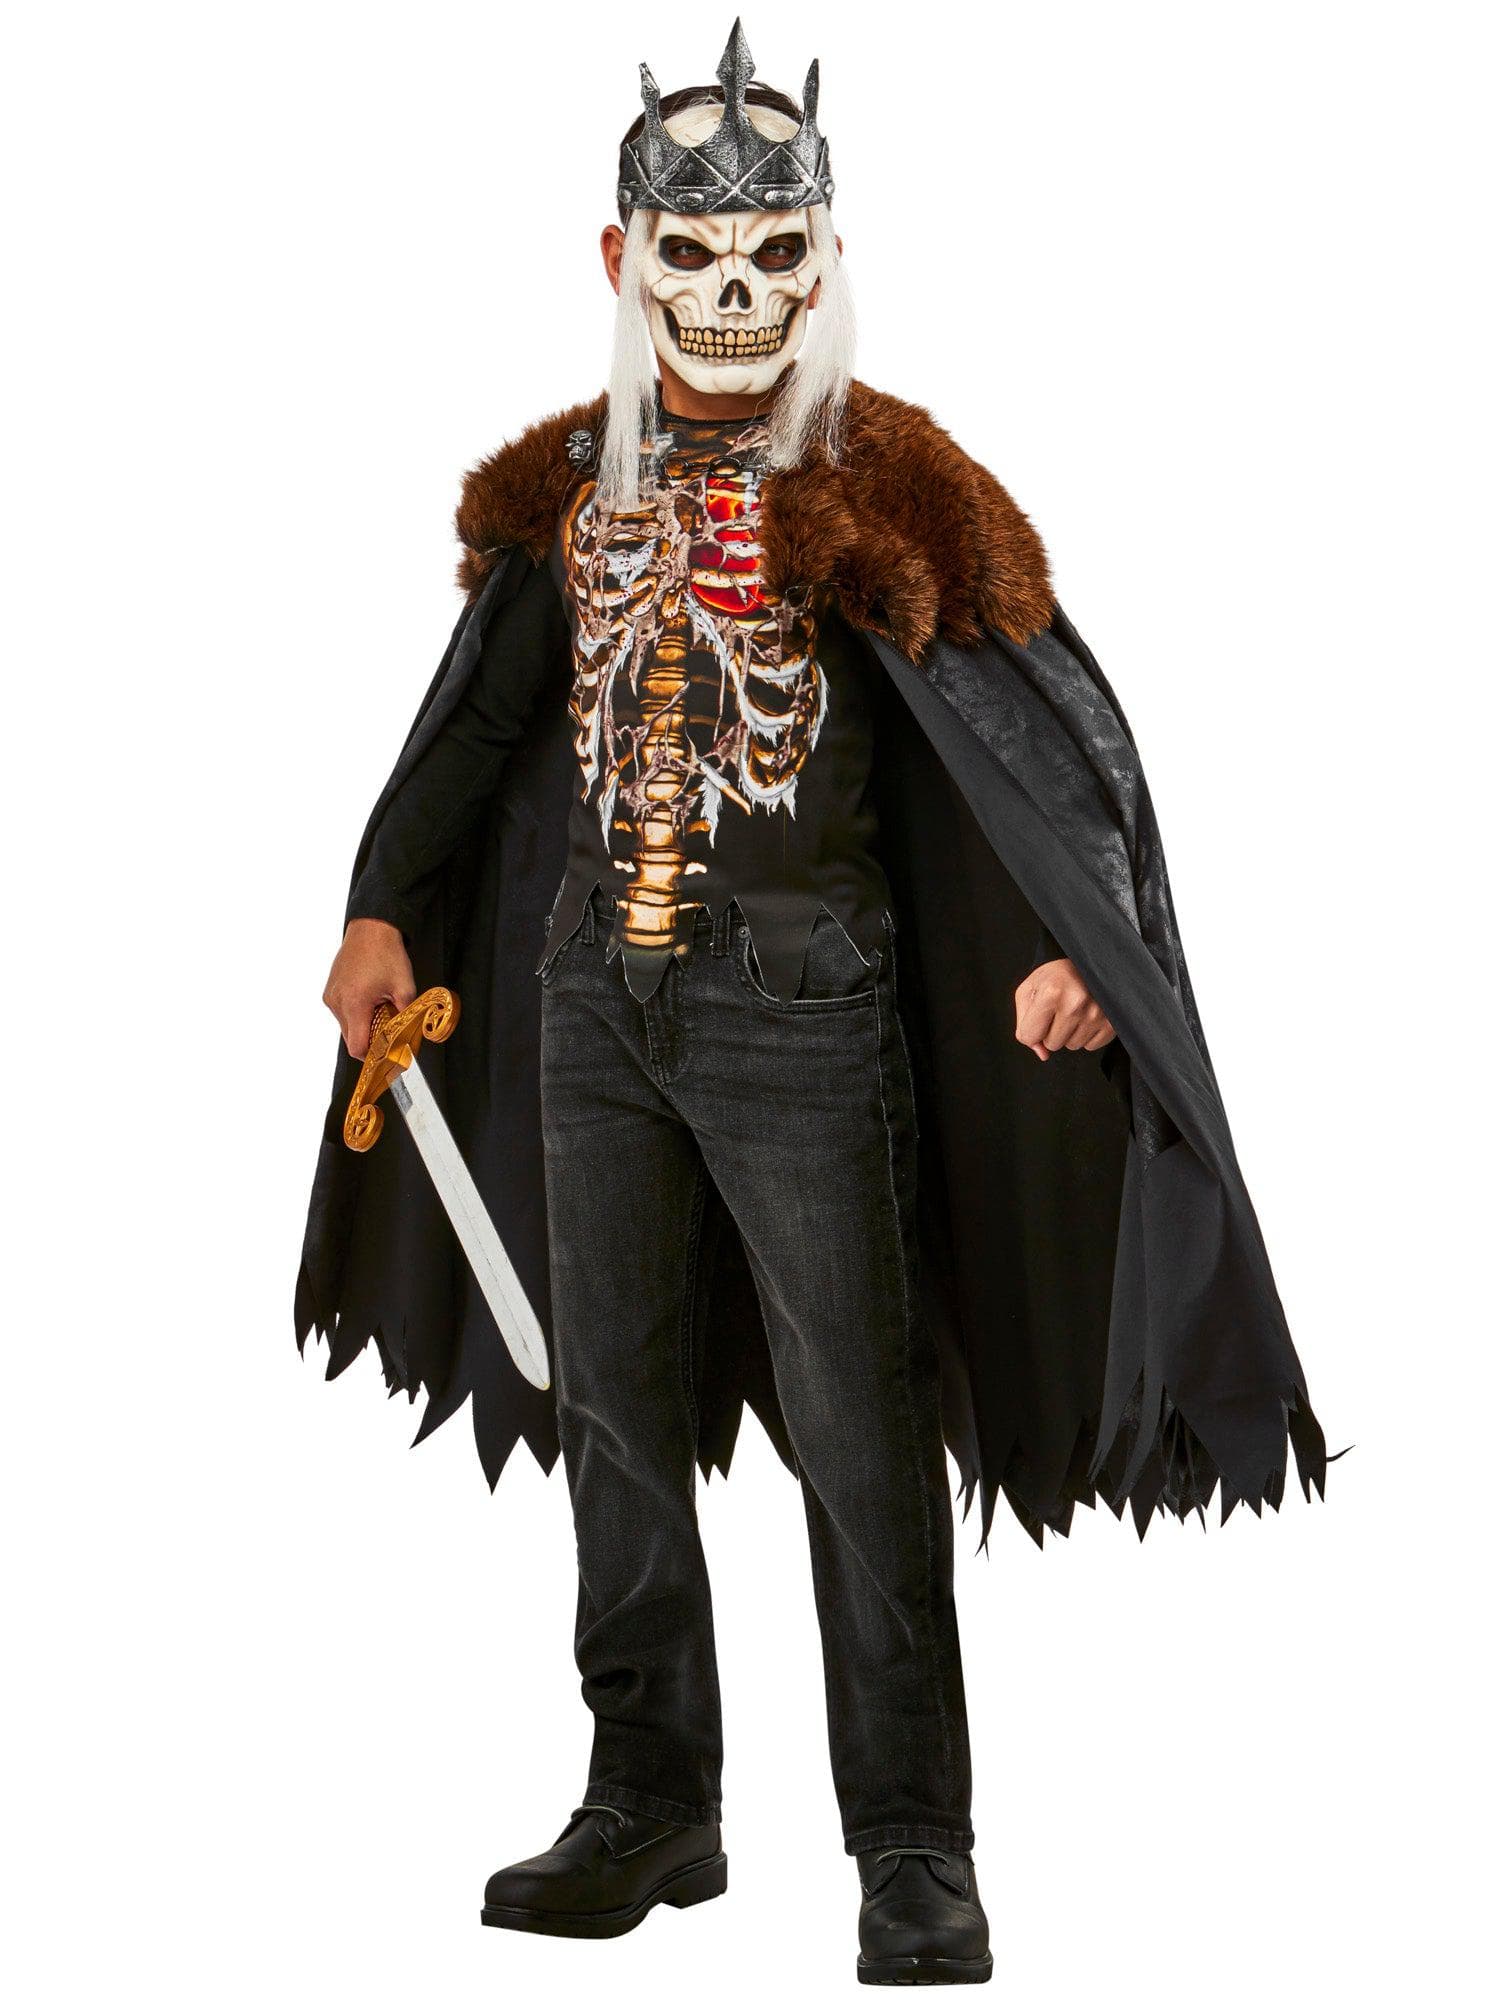 Boys' Dead King Top, Cape and Mask - costumes.com